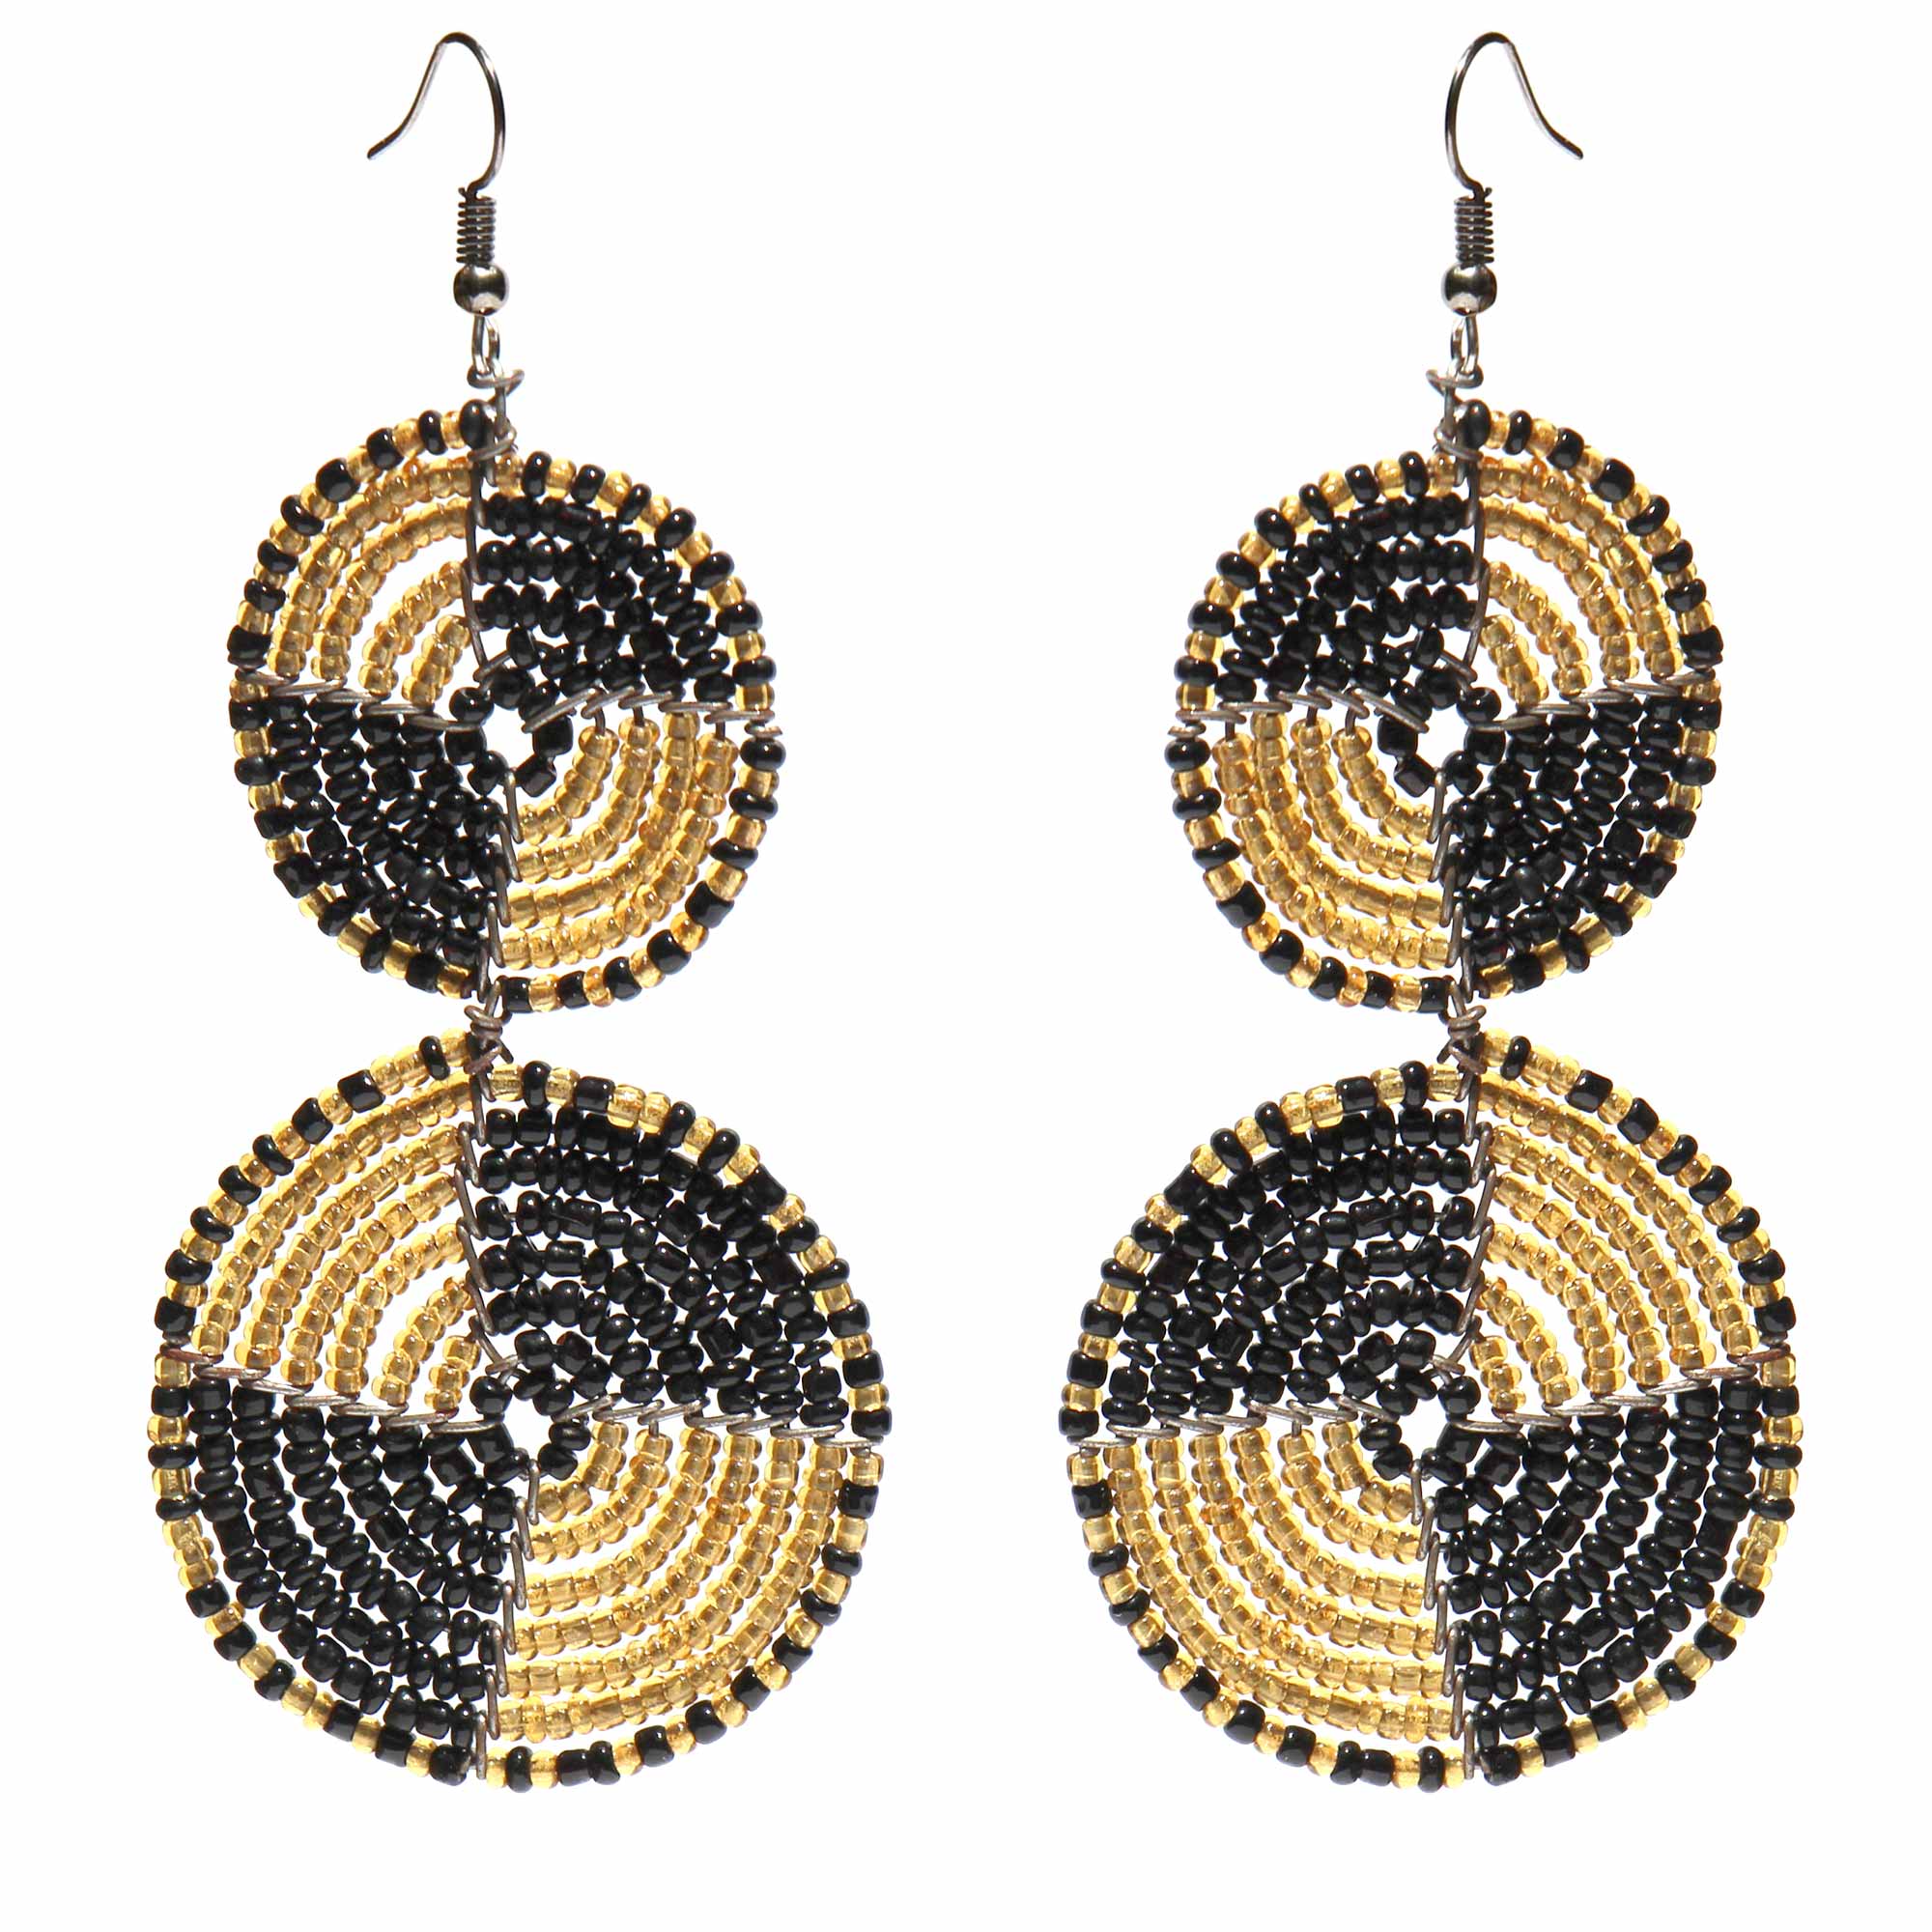 Saffora Designs Gold And Black Beads Earrings | eBay